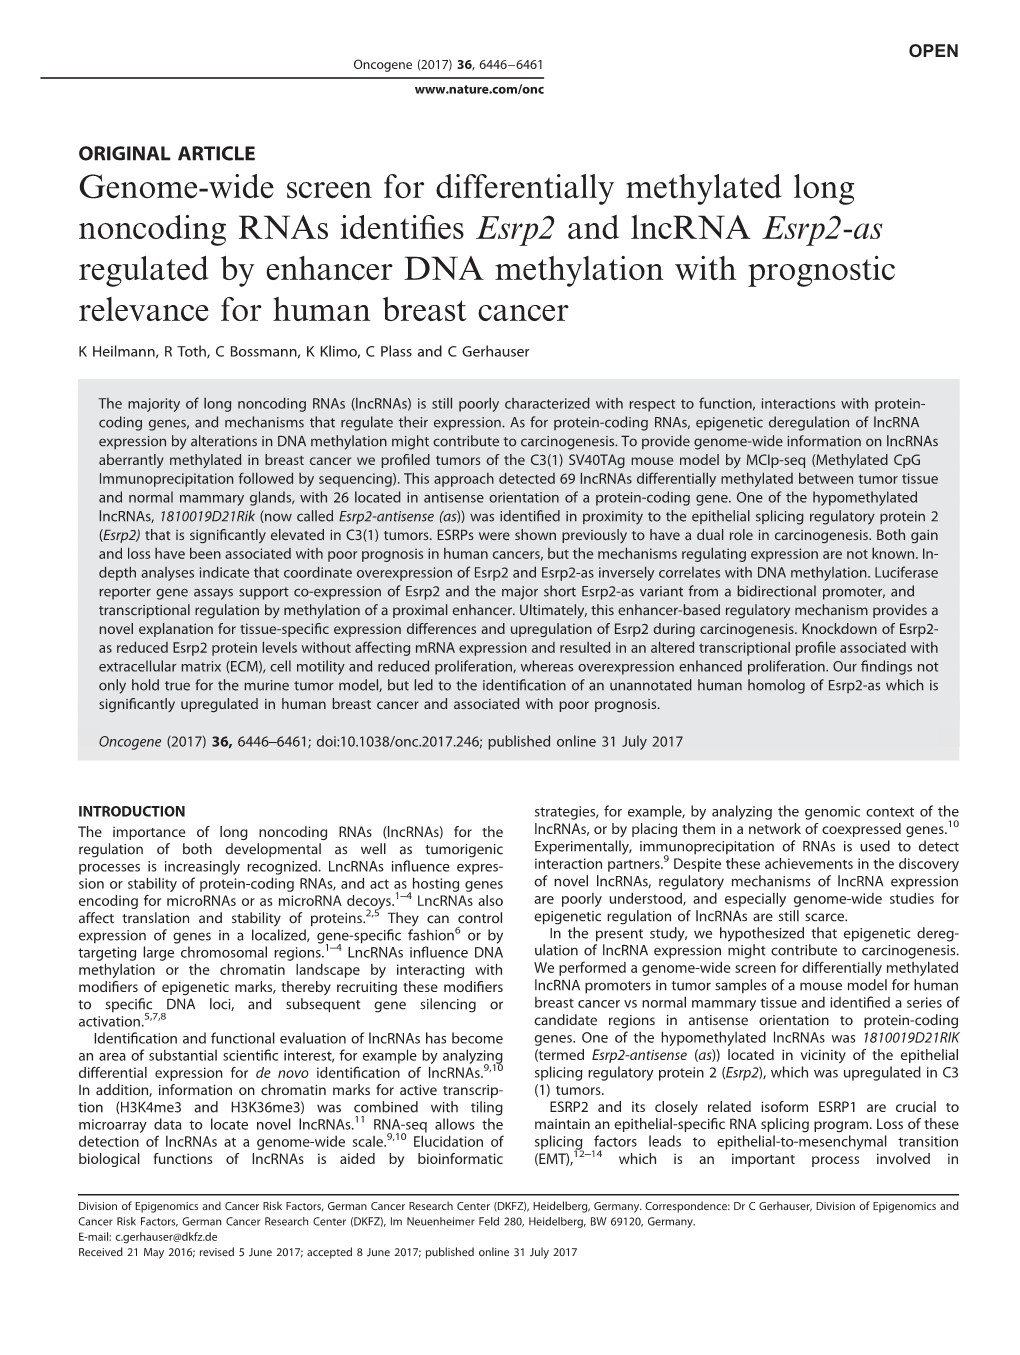 Genome-Wide Screen for Differentially Methylated Long Noncoding Rnas